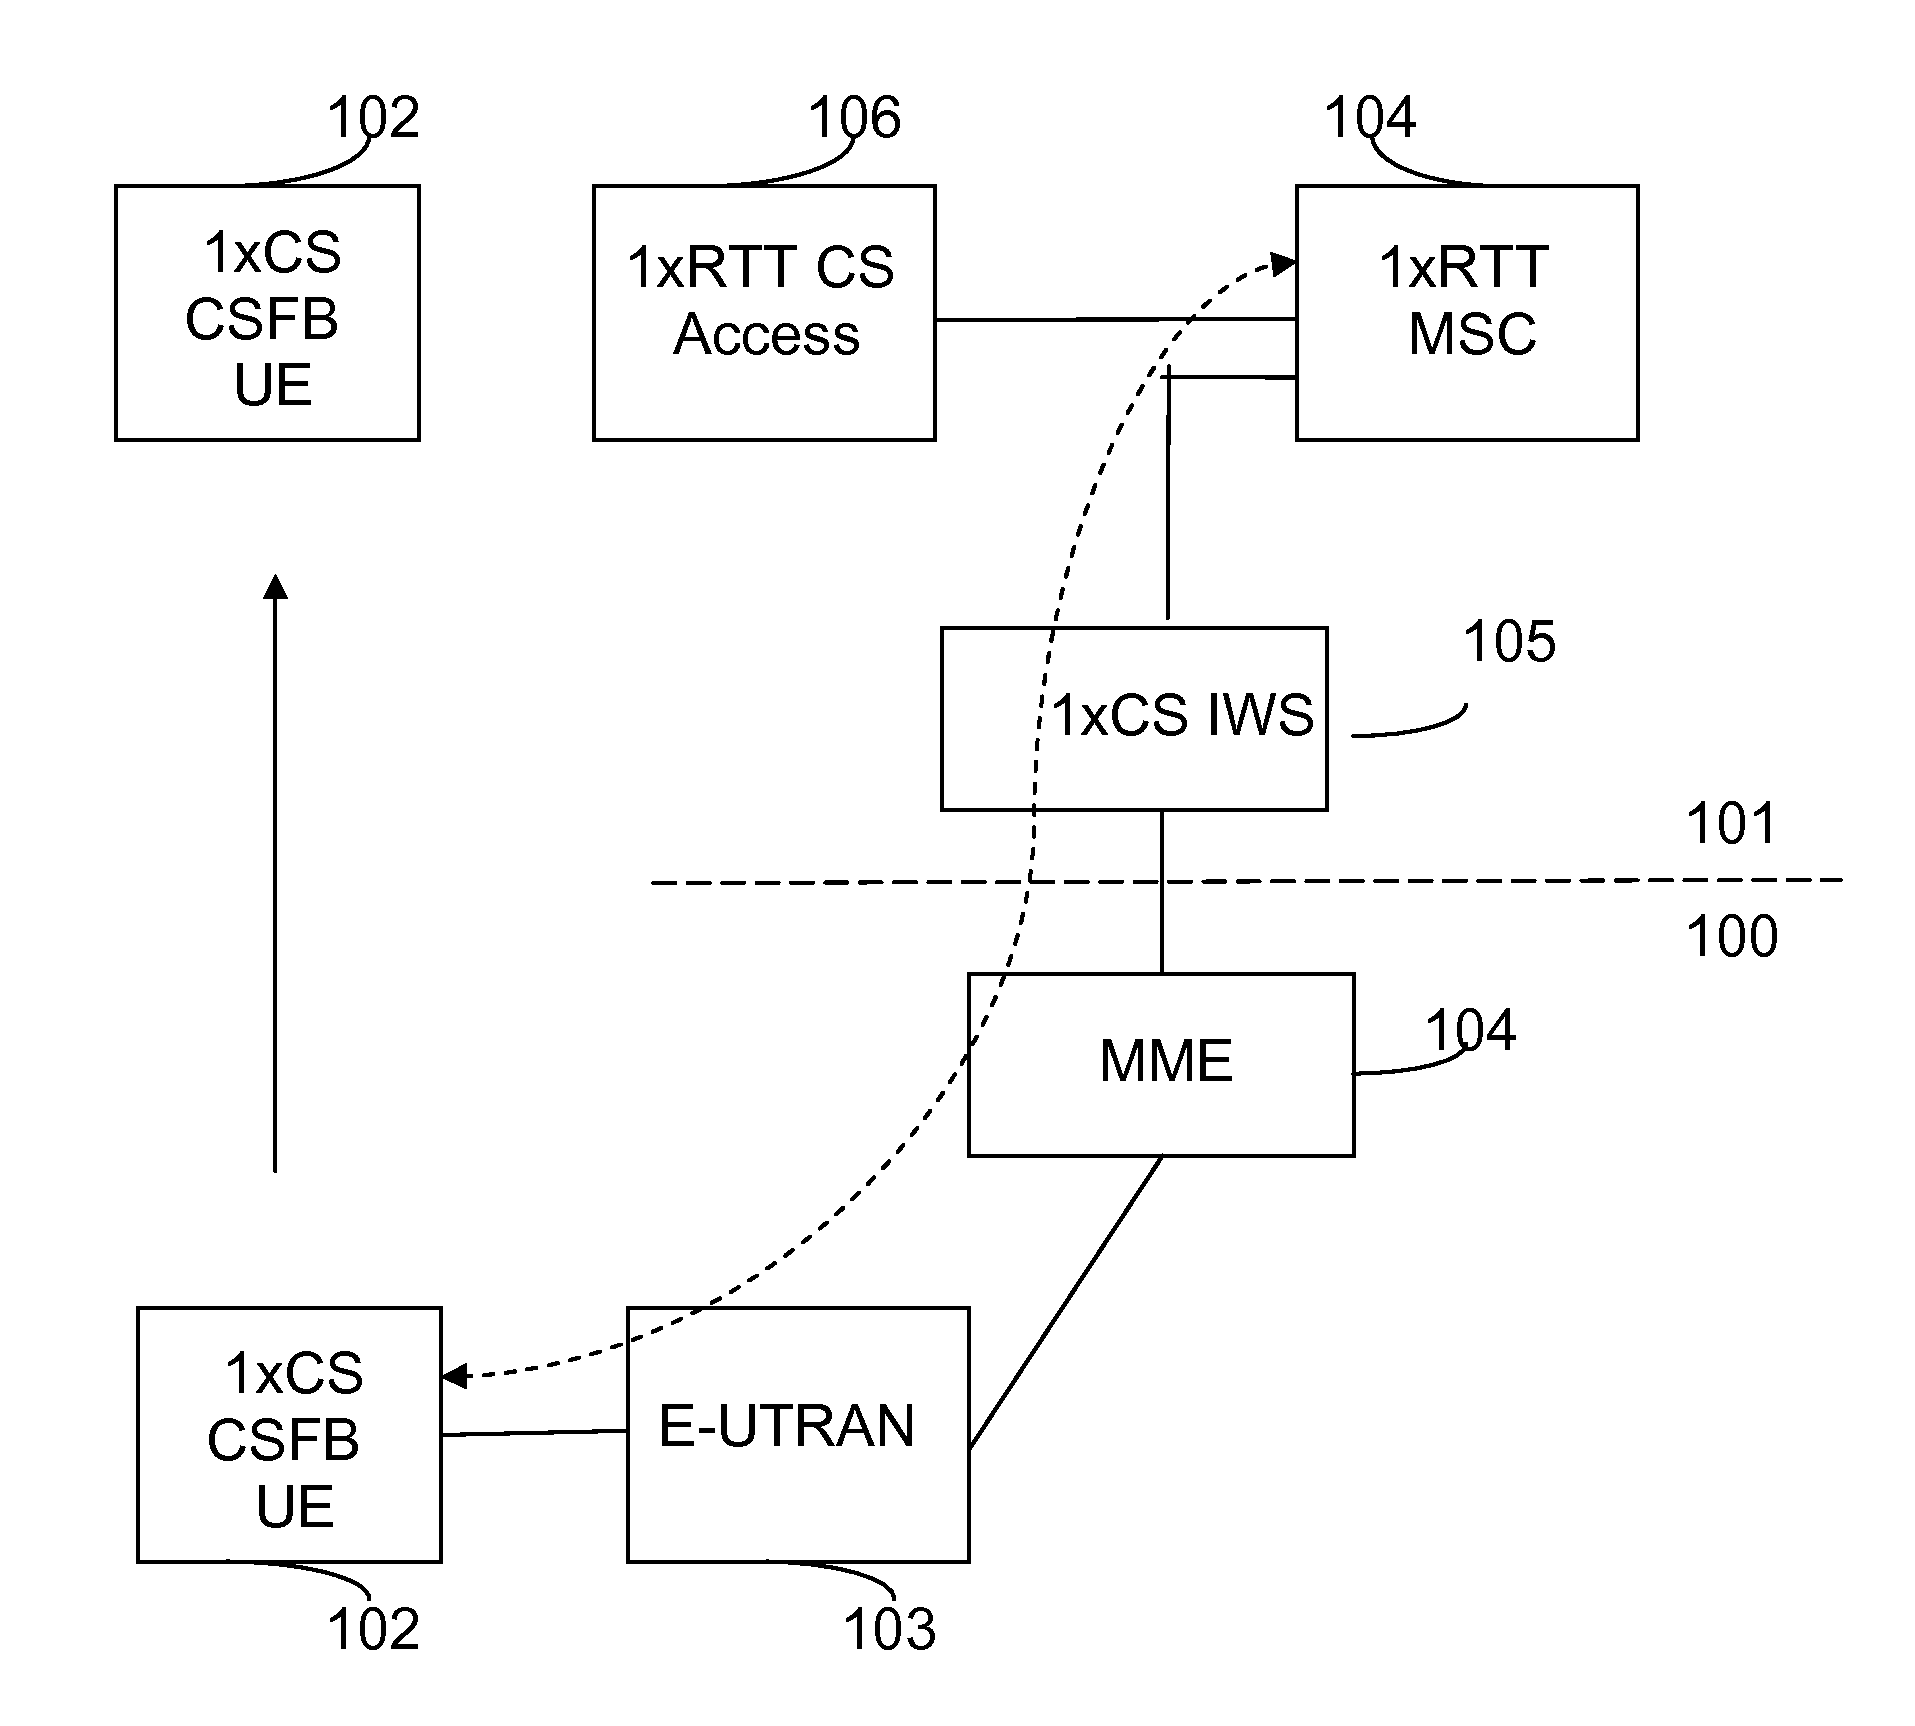 Method and Apparatus for Congestion Control for Inter-Working Communication Networks